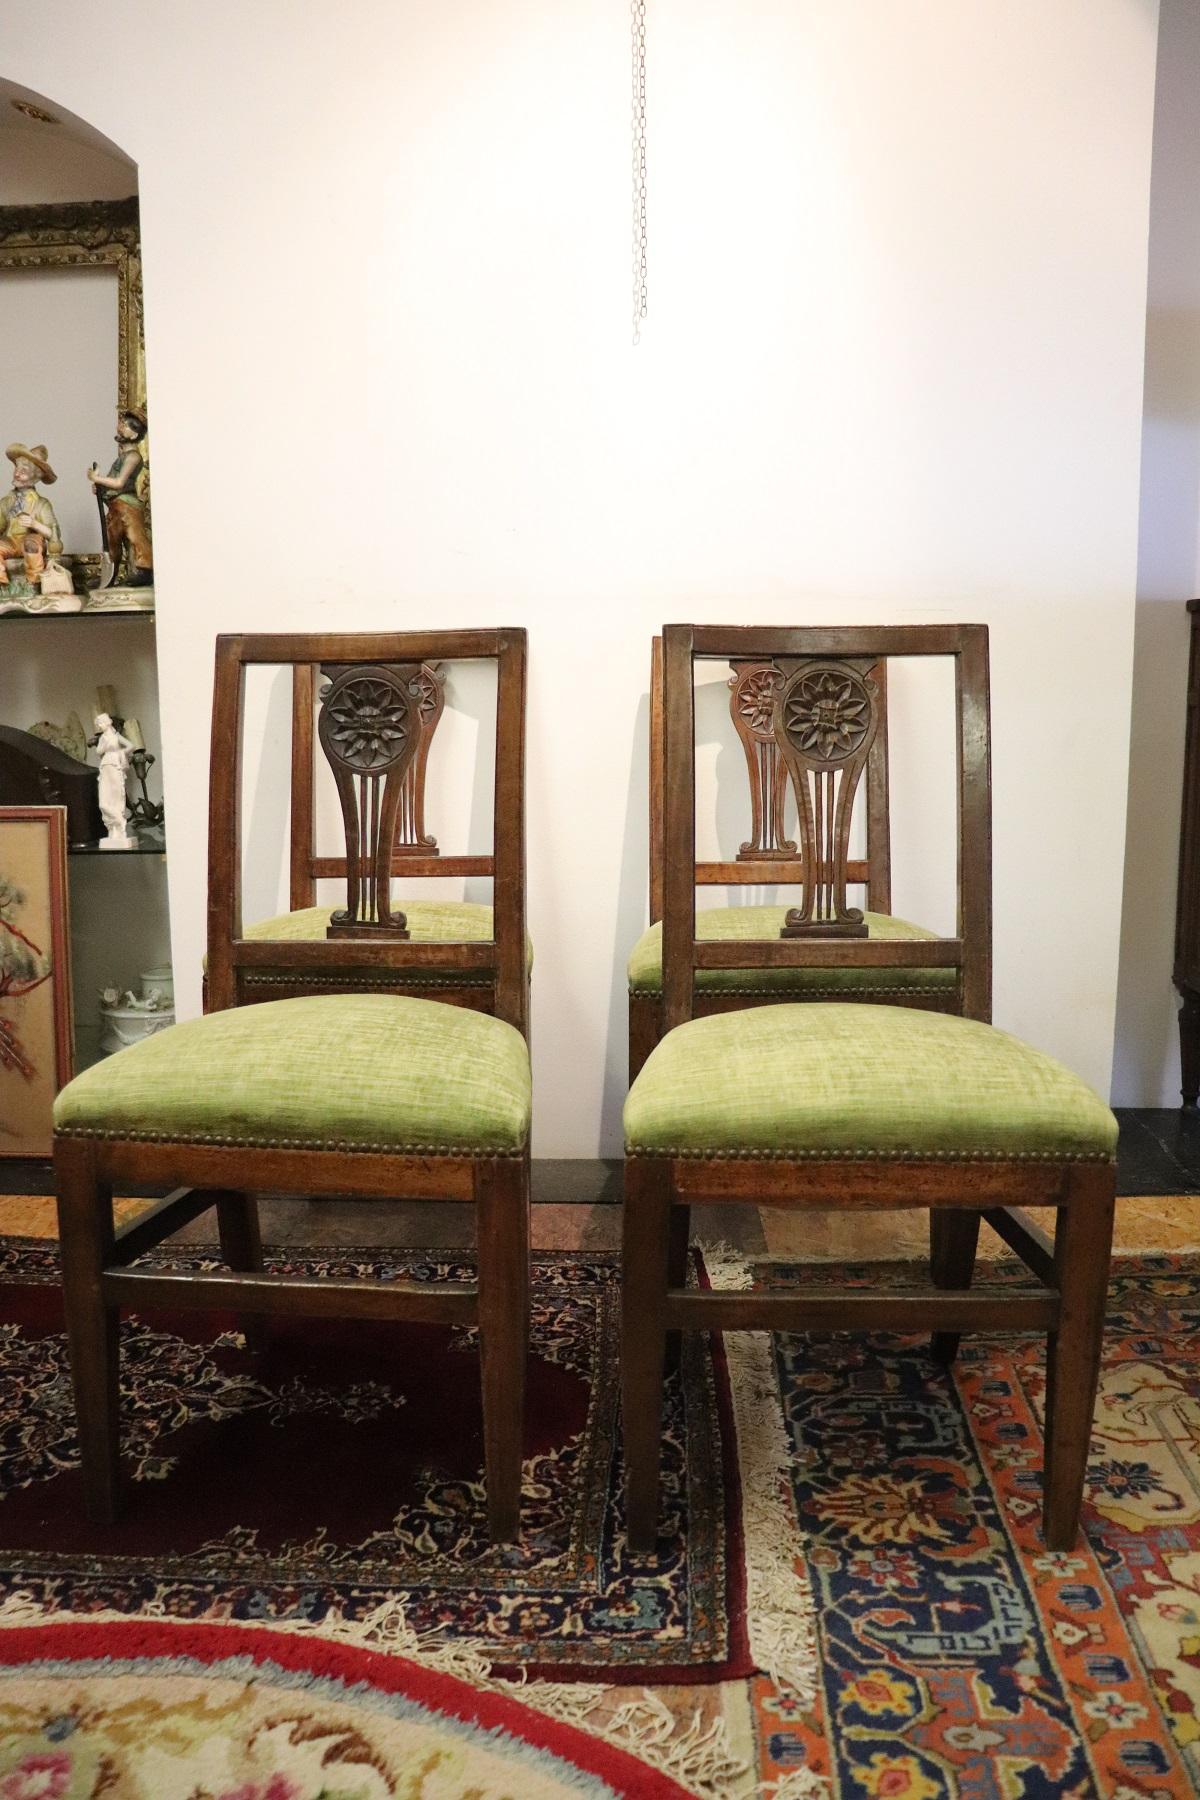 Series of four refined 18th century authentic Italian Louis XVI walnut wood four chairs. Refined decoration the back is carved with a large flower. The legs are very elegant straight. The seat is wide and comfortable. Cloth light green color used